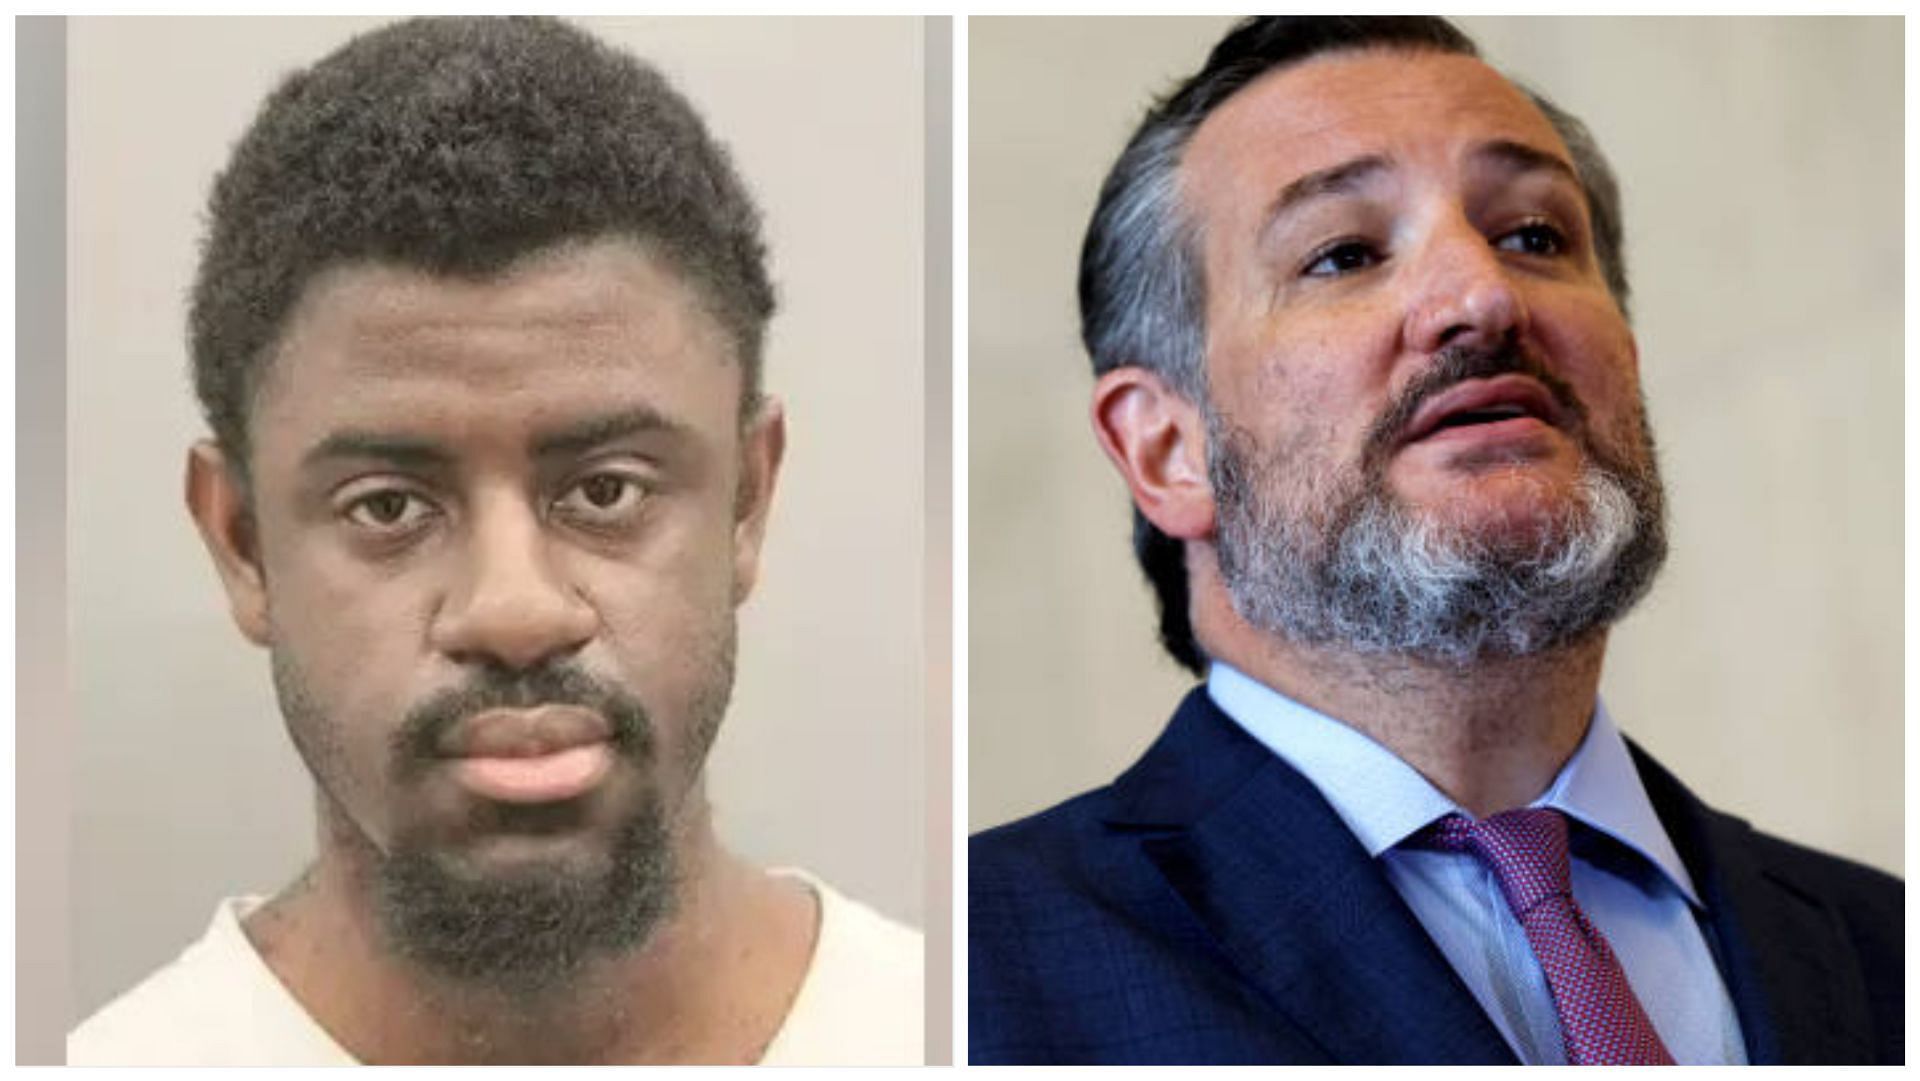 Isaac Nformangum (left) threatened to kill Senator Ted Cruz and other Republicans (Image via Twitter/Getty Images)